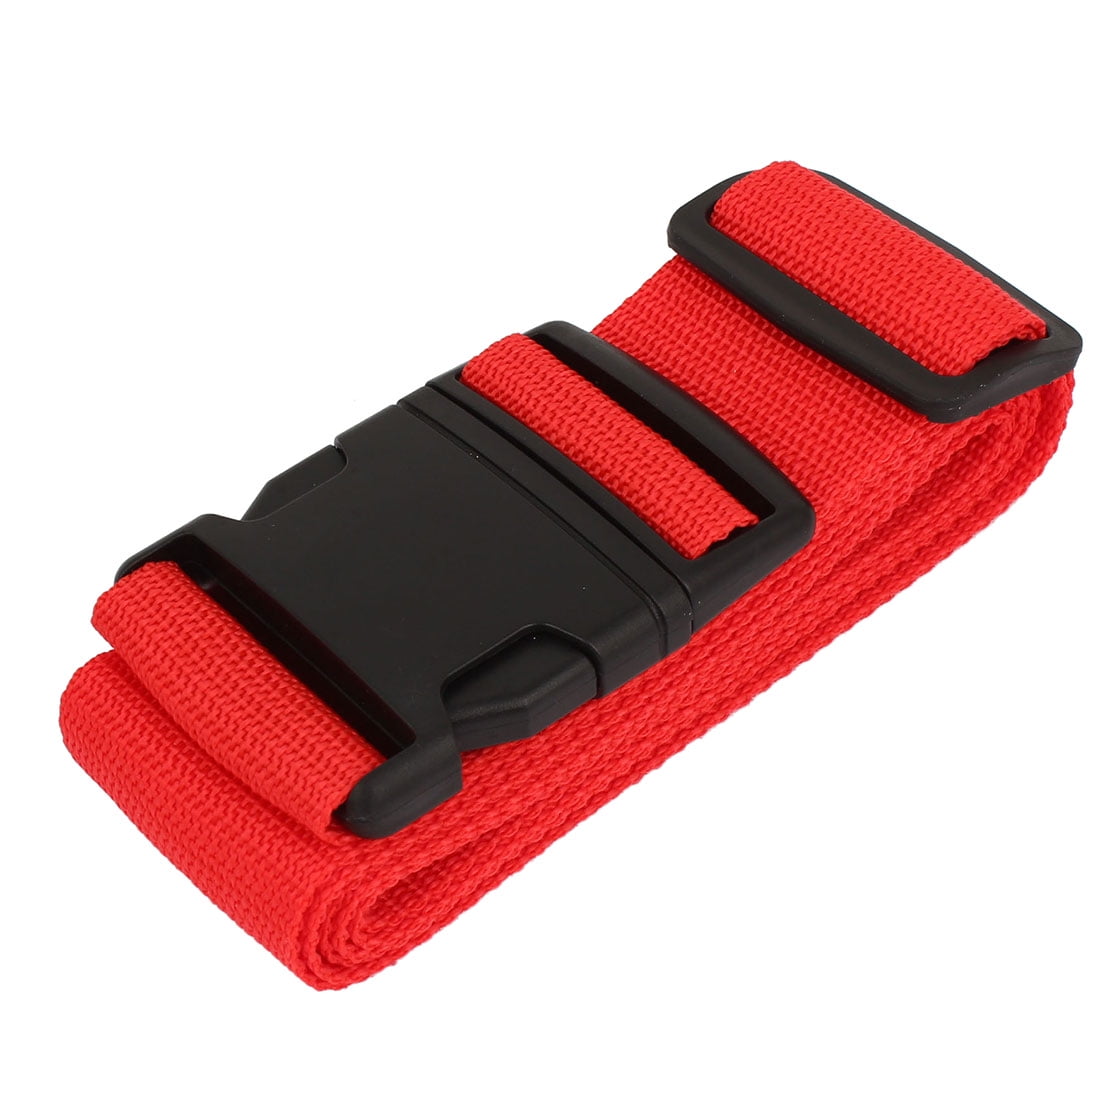 travel bands for suitcases